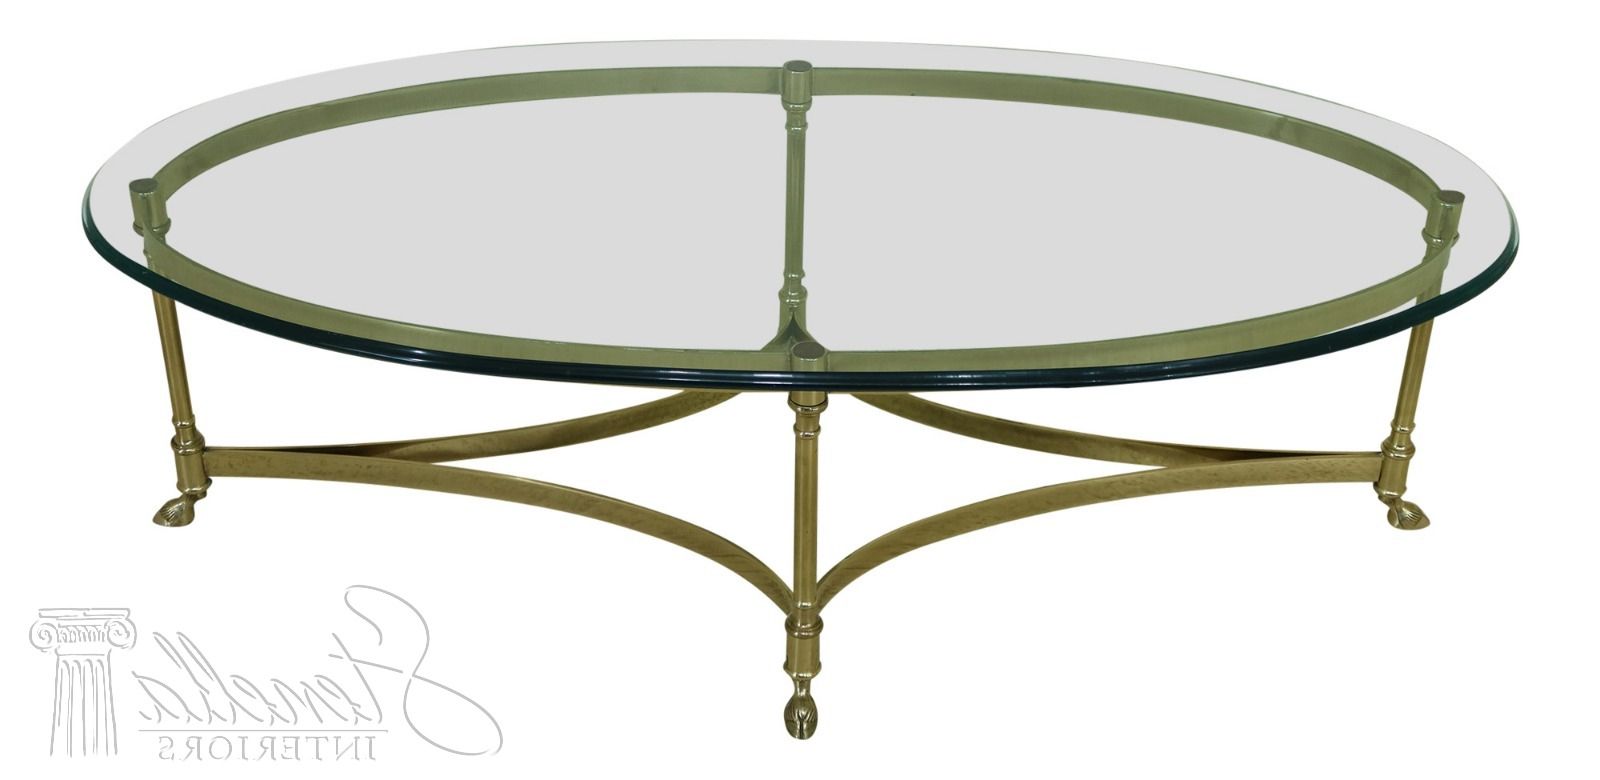 2020 Glass And Gold Oval Coffee Tables Pertaining To 32017ec: Labarge Oval Brass & Glass Regency Coffee Table (Gallery 3 of 20)